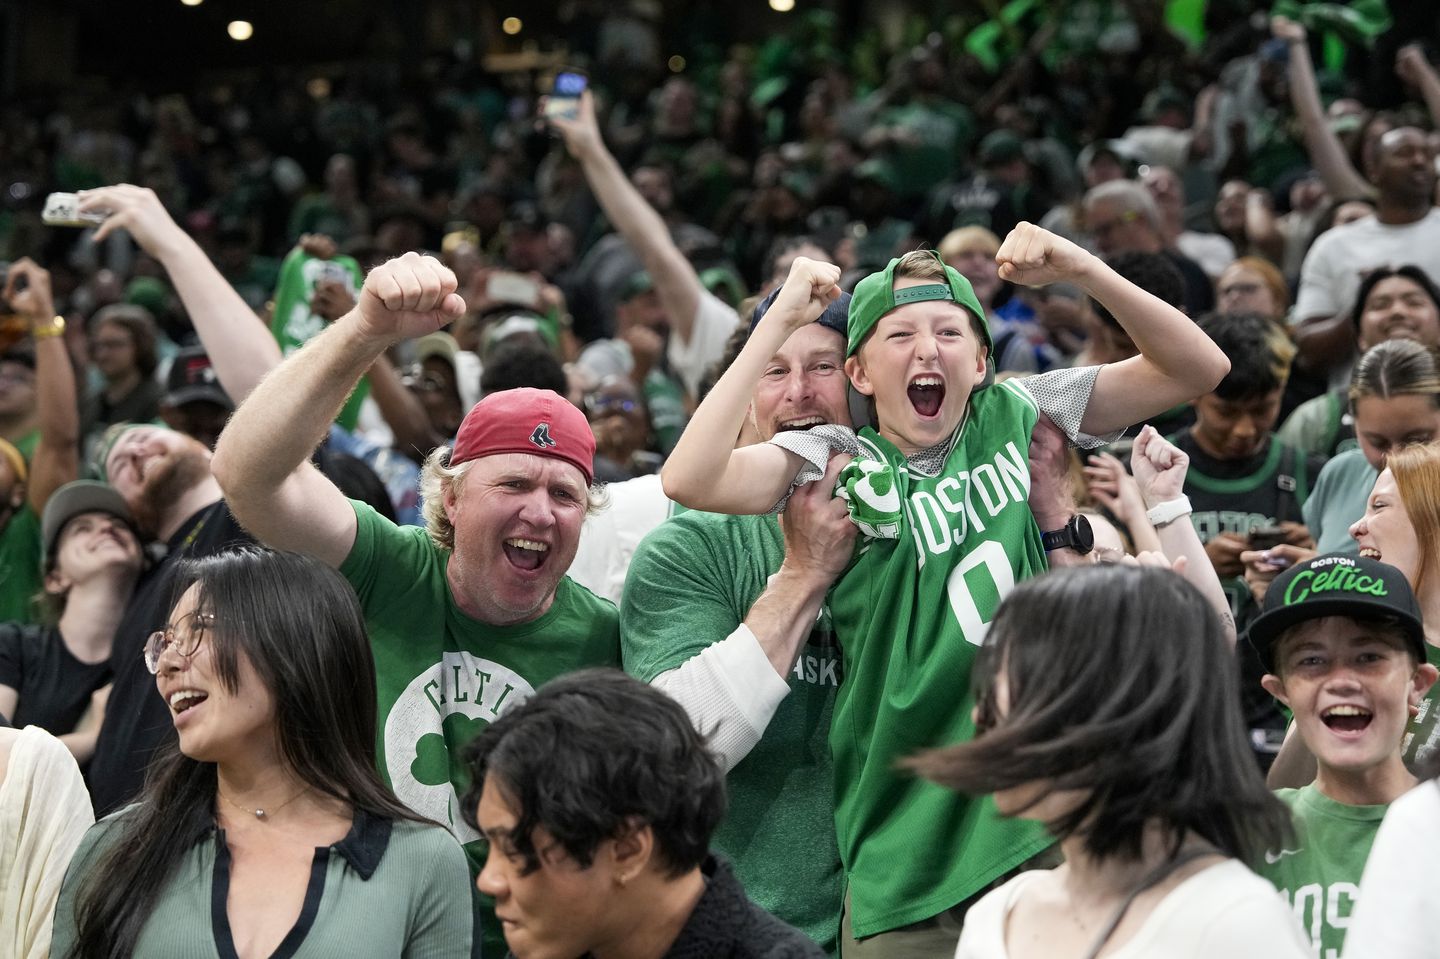 Fans at the TD Garden watch party celebrated the Celtics' victory in Game 3 of the NBA Finals Wednesday.